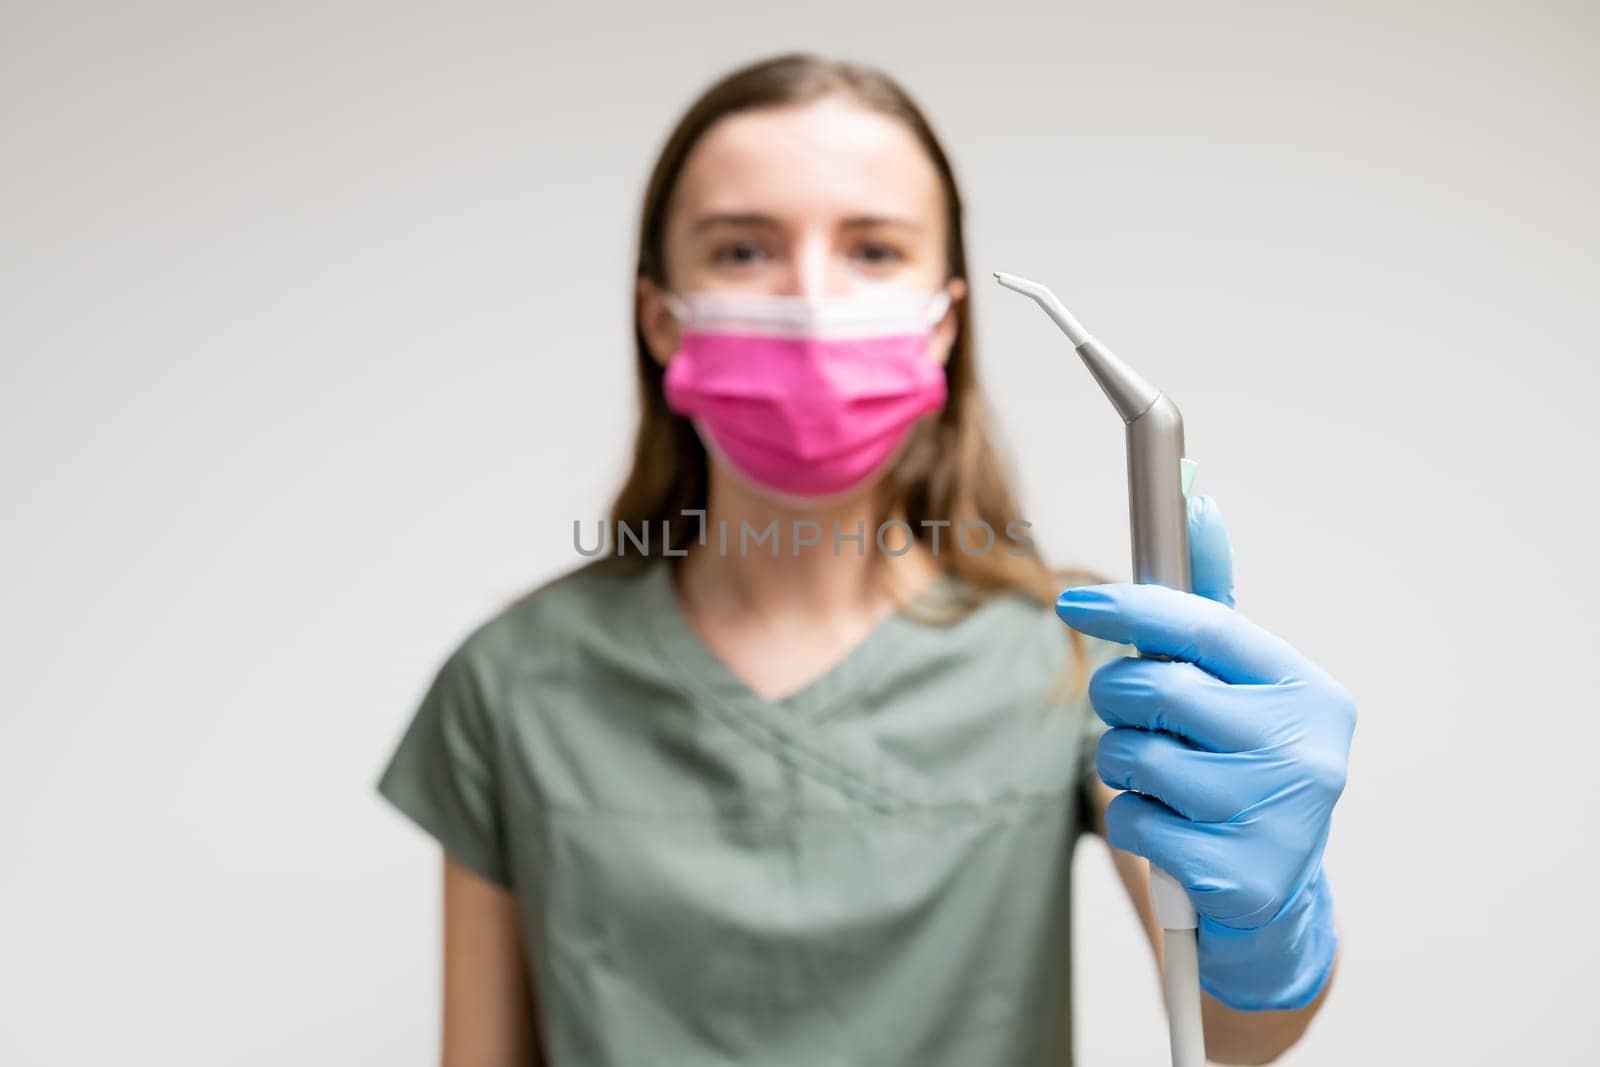 Dentist in face mask holding air and water syringe in dentist hand in rubber gloves by vladimka